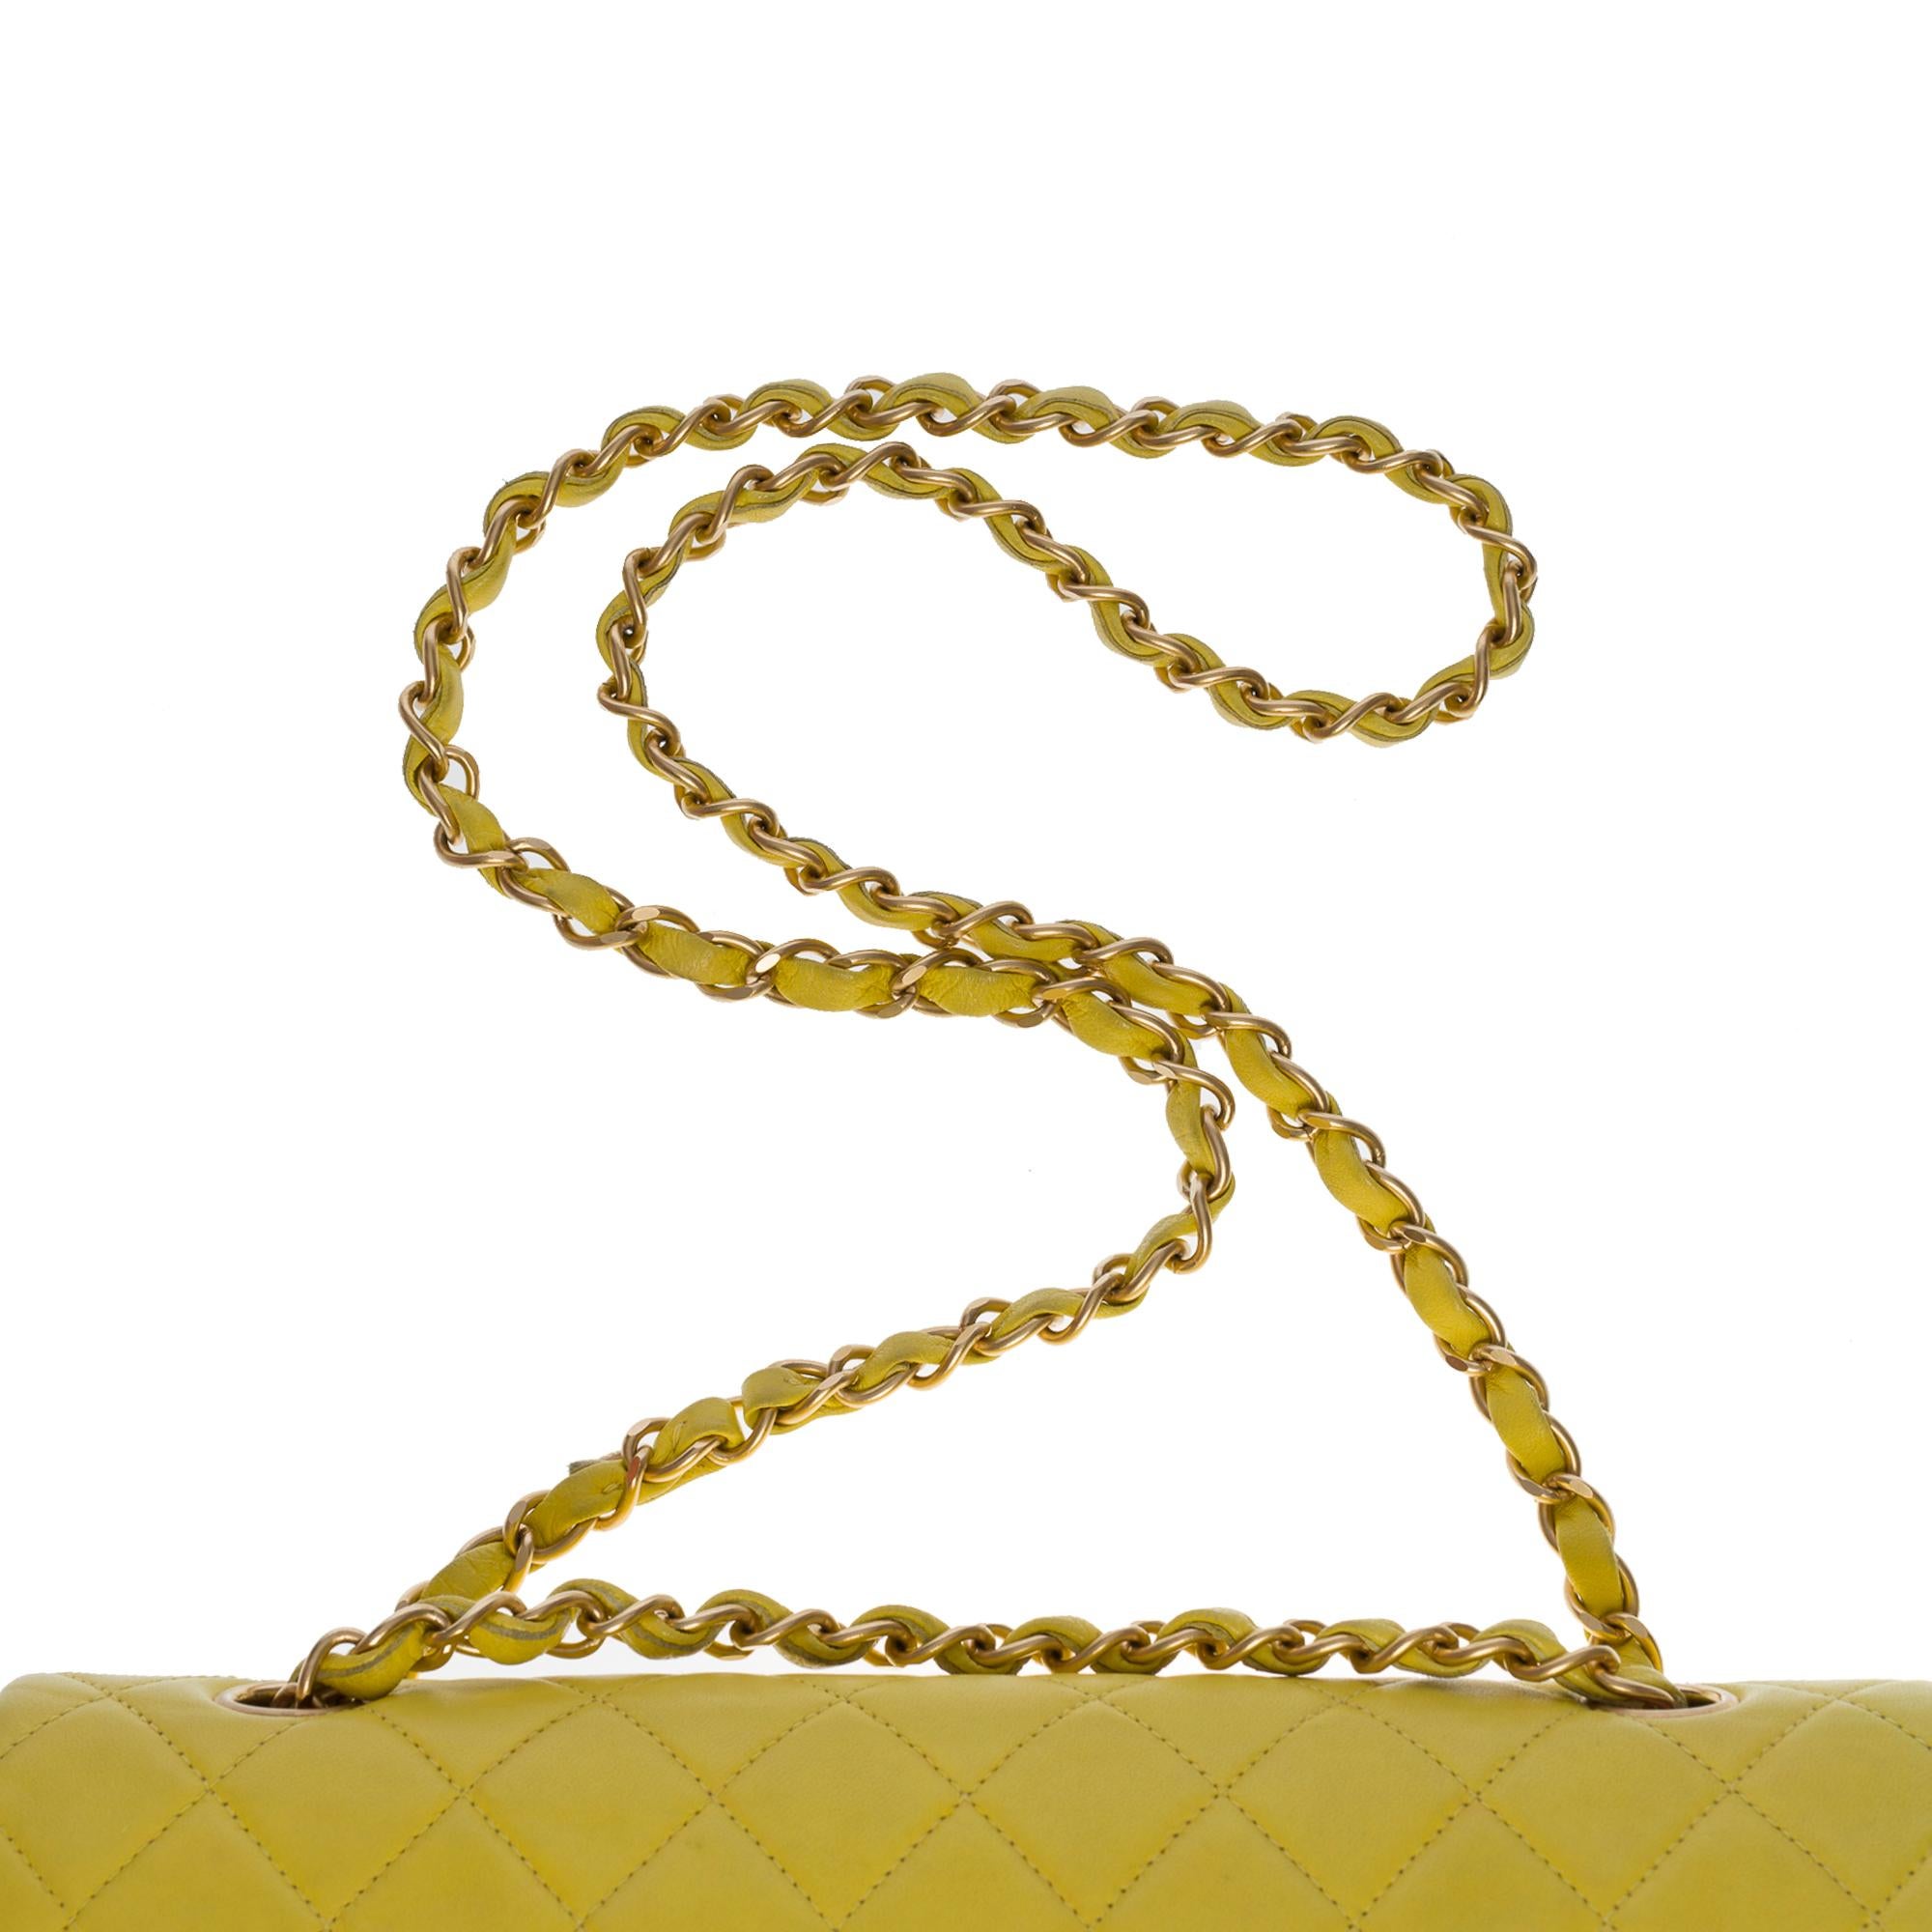 Chanel Timeless Medium double flap shoulder bag in Yellow quilted lambskin , BGHW 5